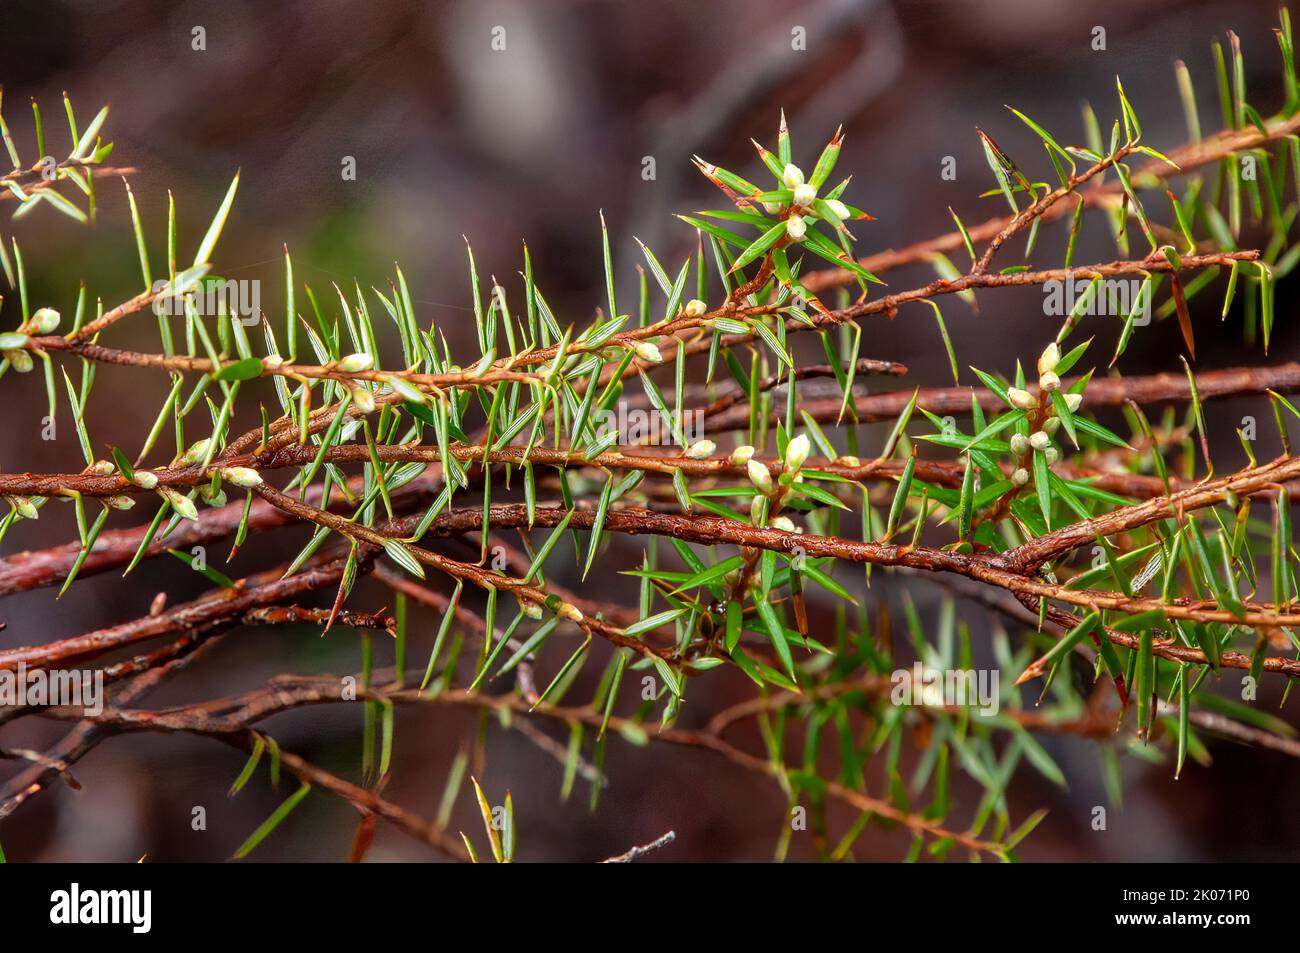 Lake St Clair Australia, close up of stems and leaves of a leptecophylla juniperina Var cyathodes parvifolia or pink mountain-berry tree Stock Photo